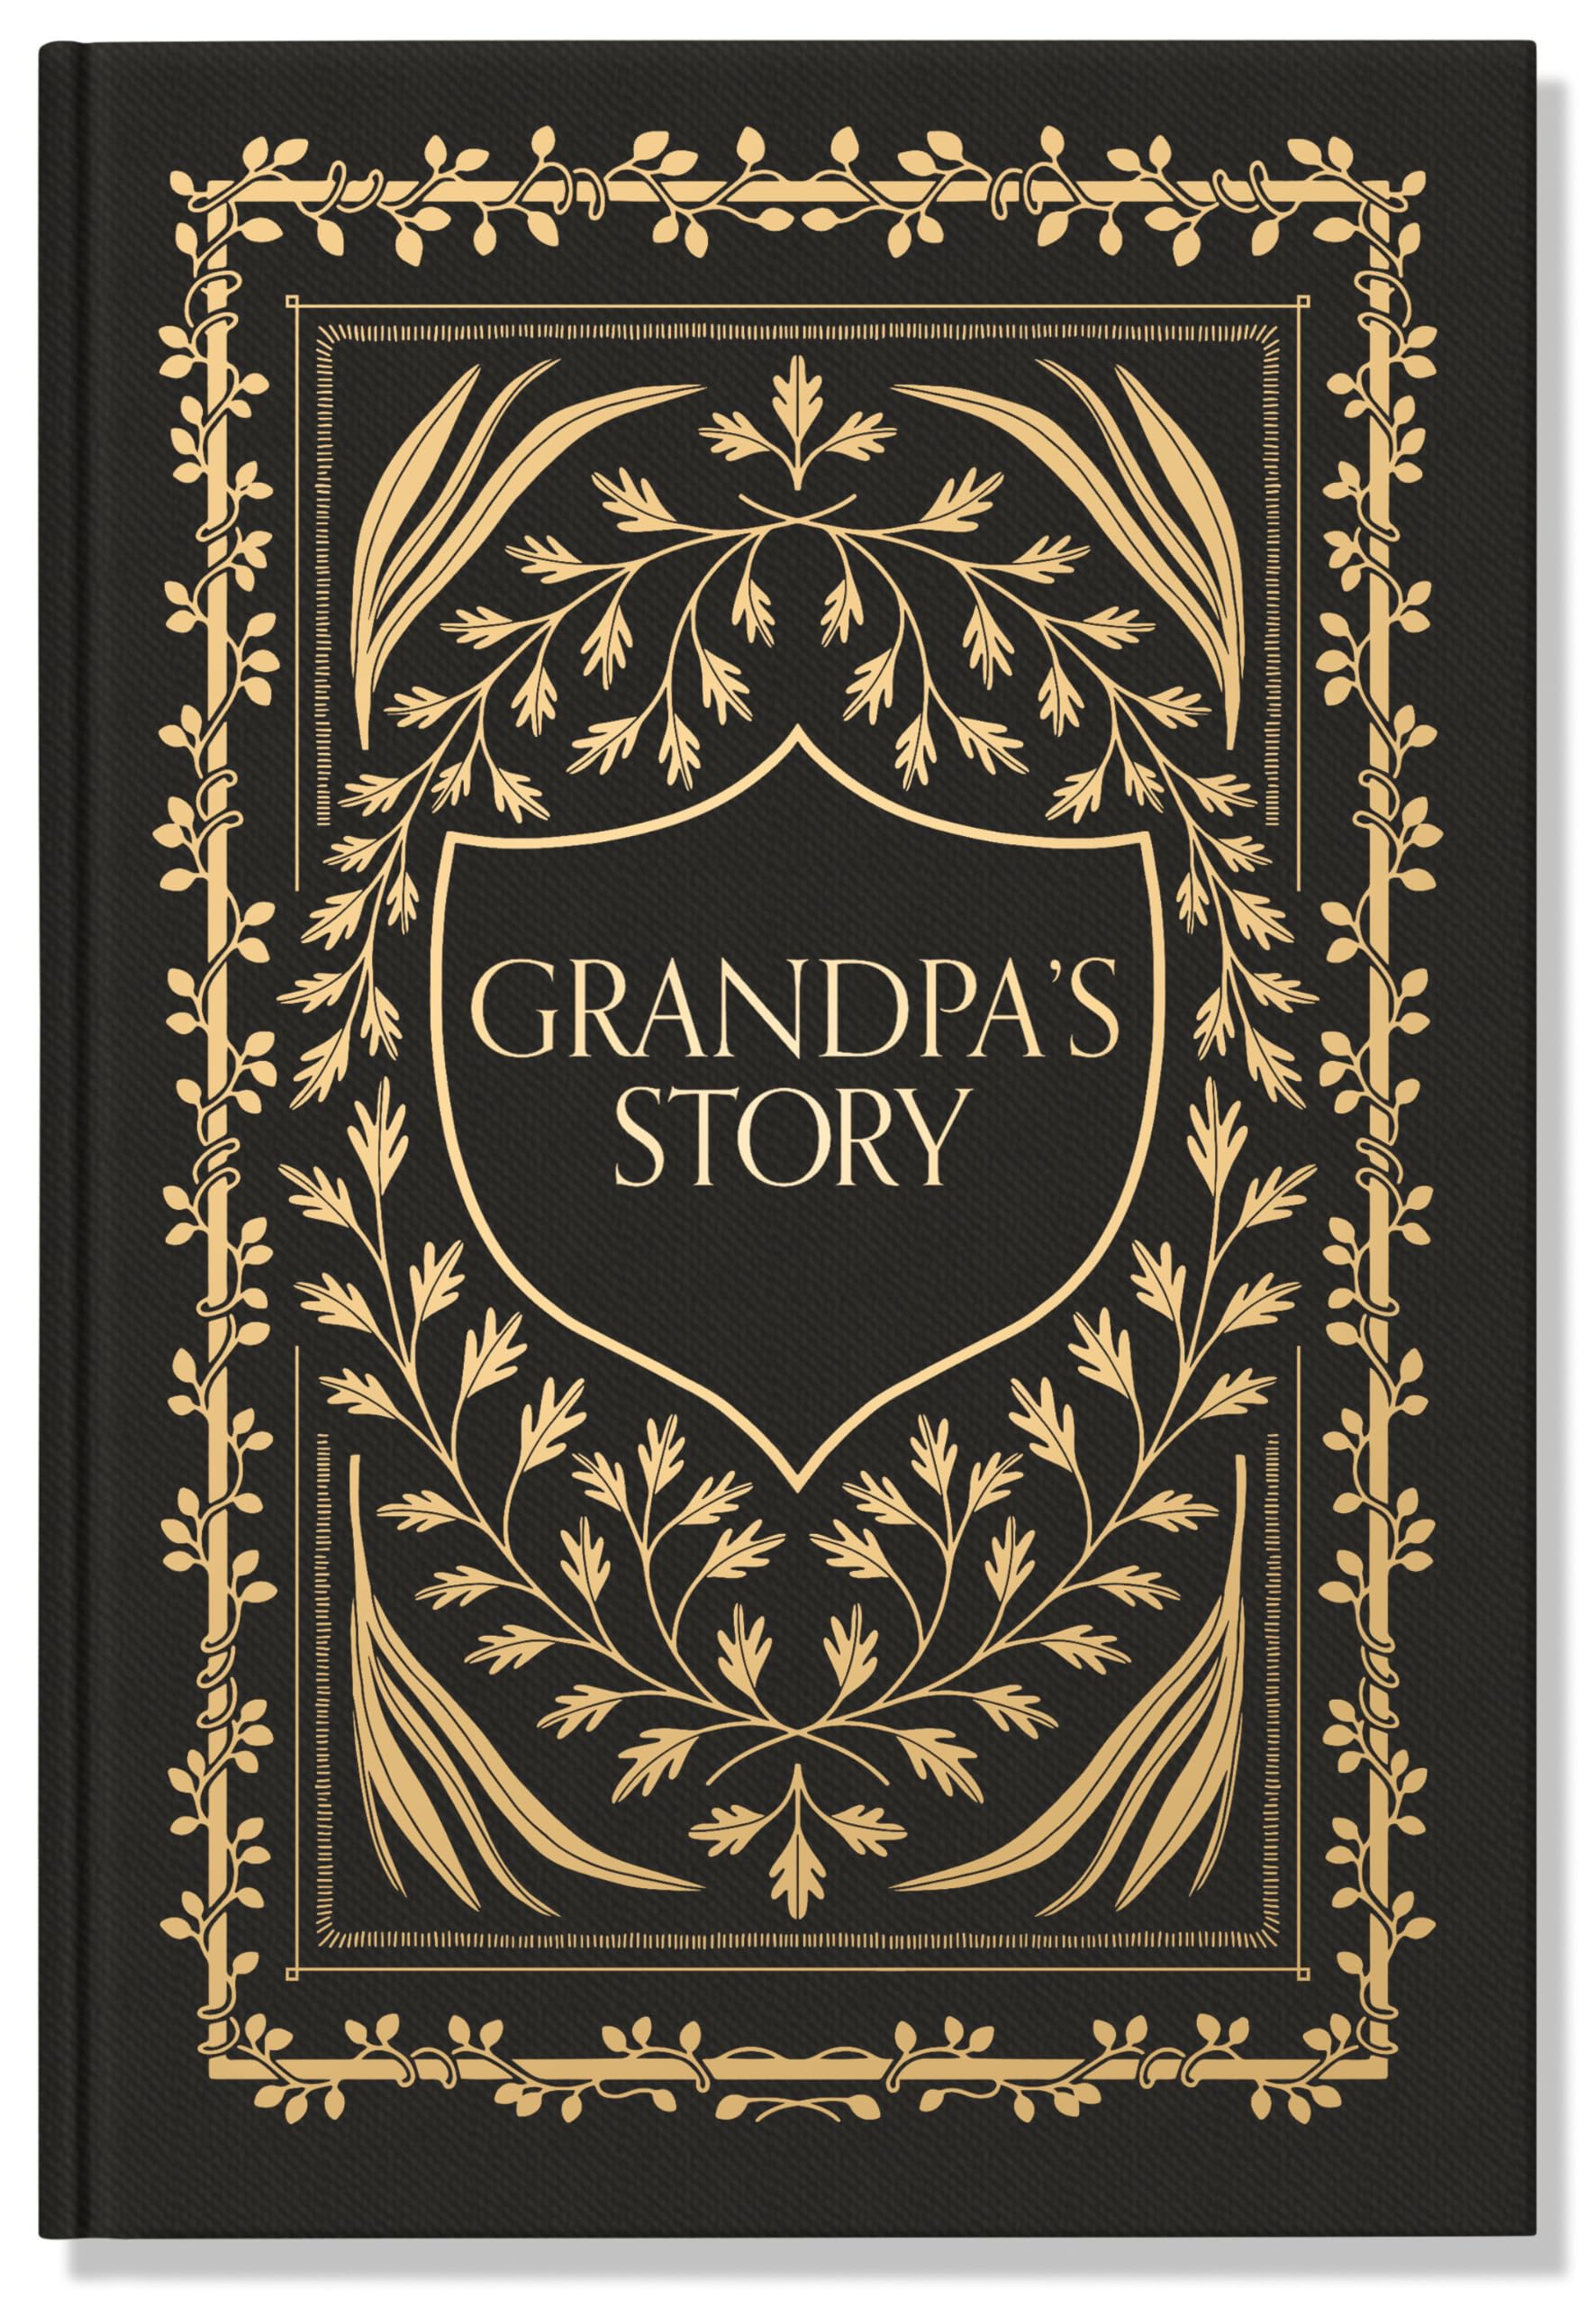 Grandpa's Story: A Memory and Keepsake Journal for My Family by Herold, Korie